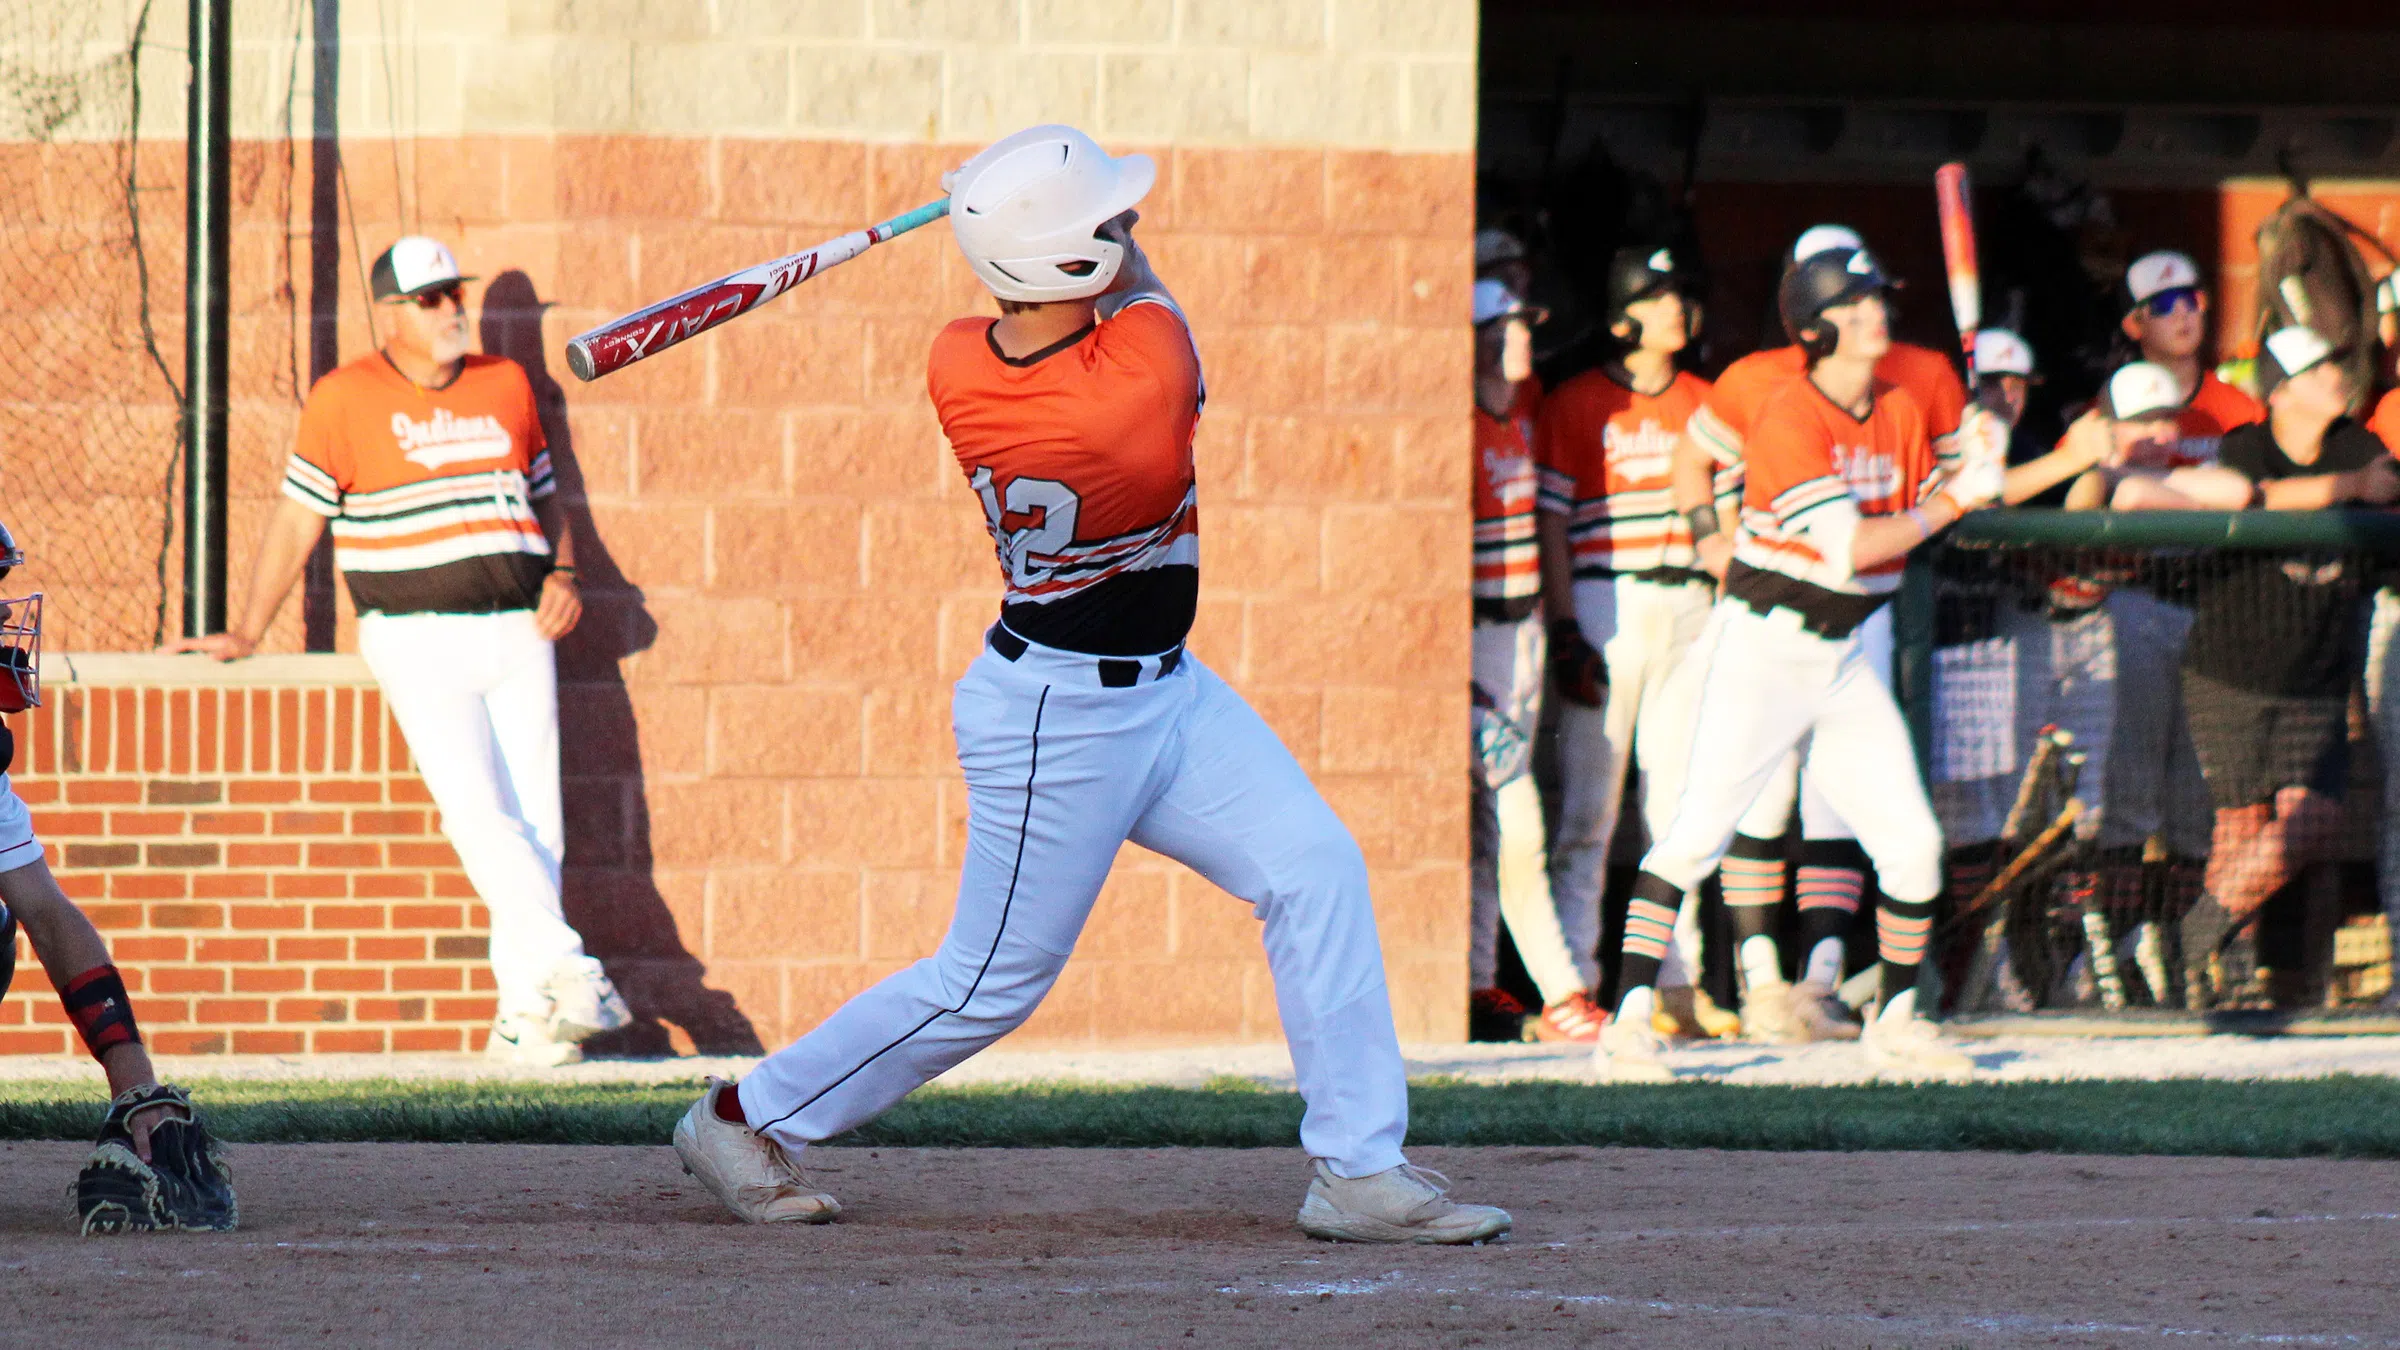 Altamont 3-0 on Week With Friday Win Over Cisne